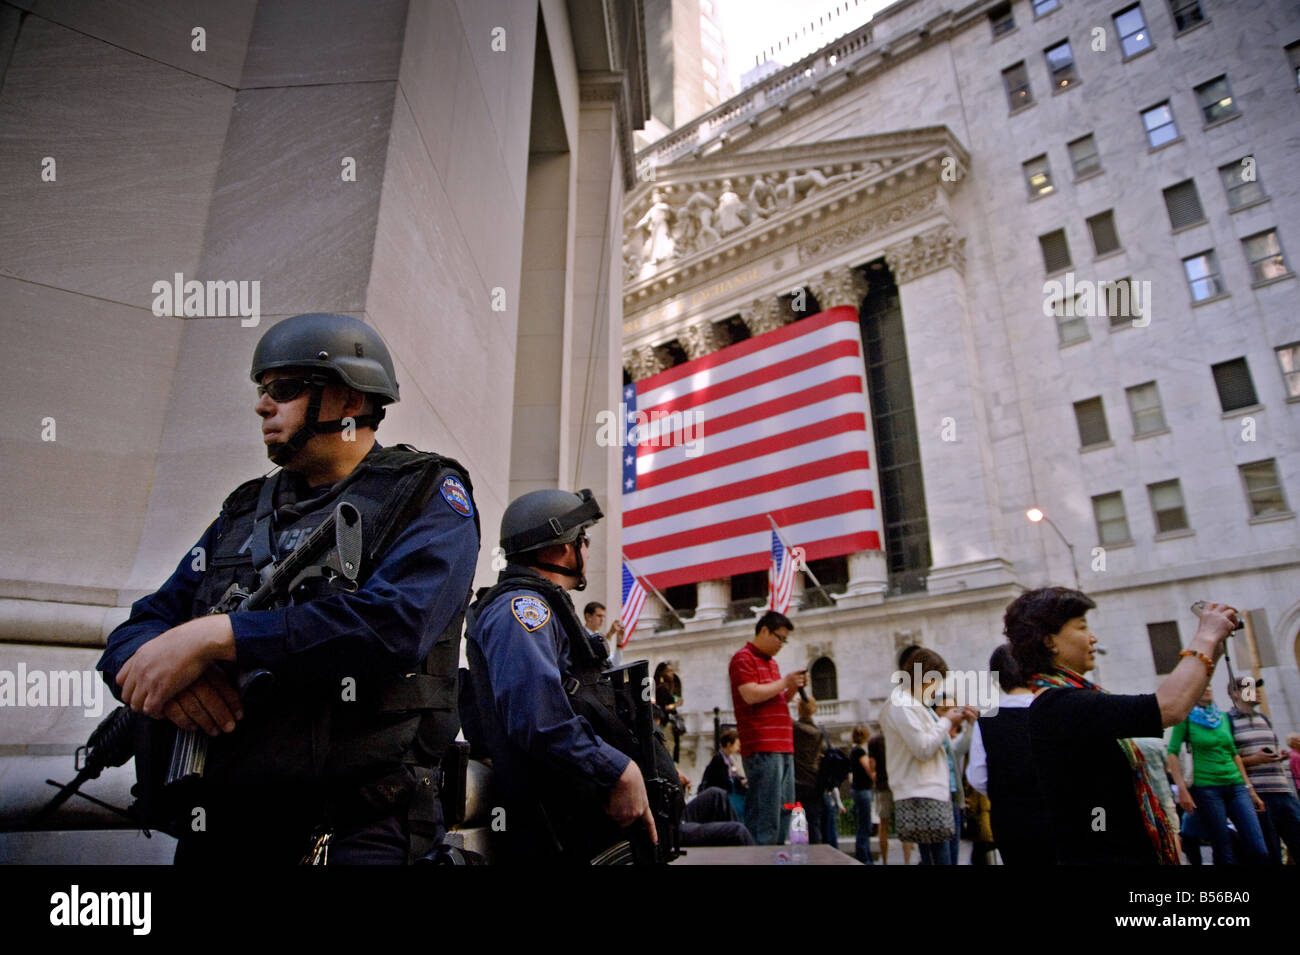 Armed NYPD police maintain guard at the New York Stock Exchange during the credit crunch financial crisis of 2008 Stock Photo